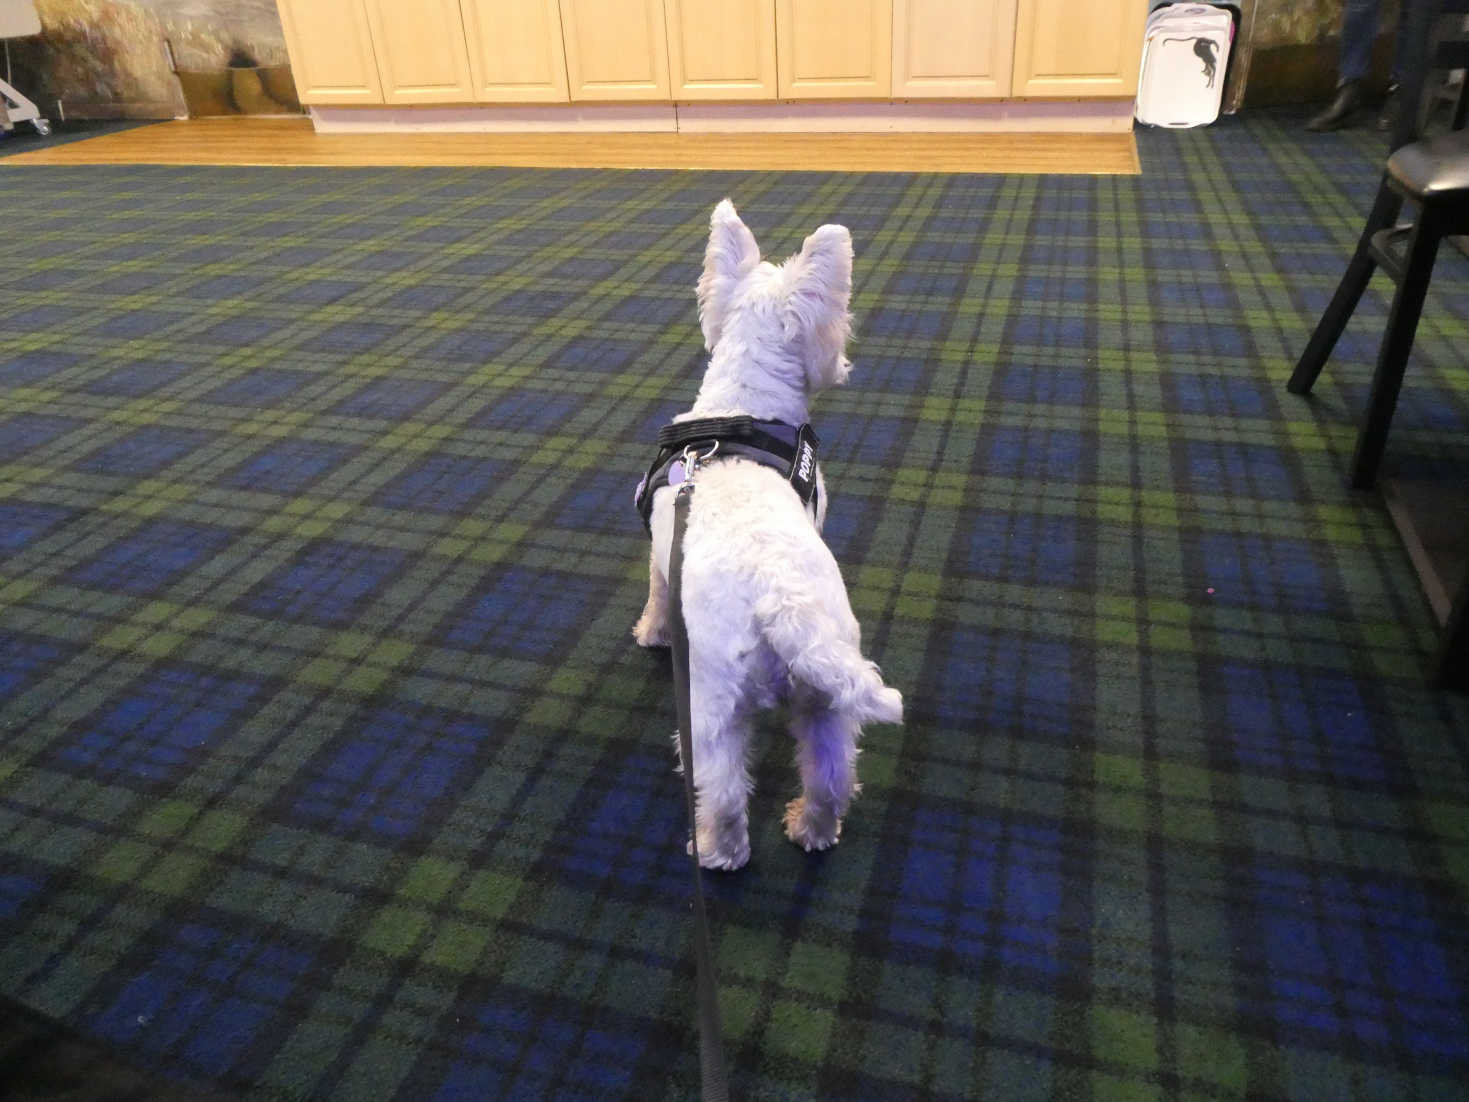 poppy the westie waiting for food at the heathers eyemouth